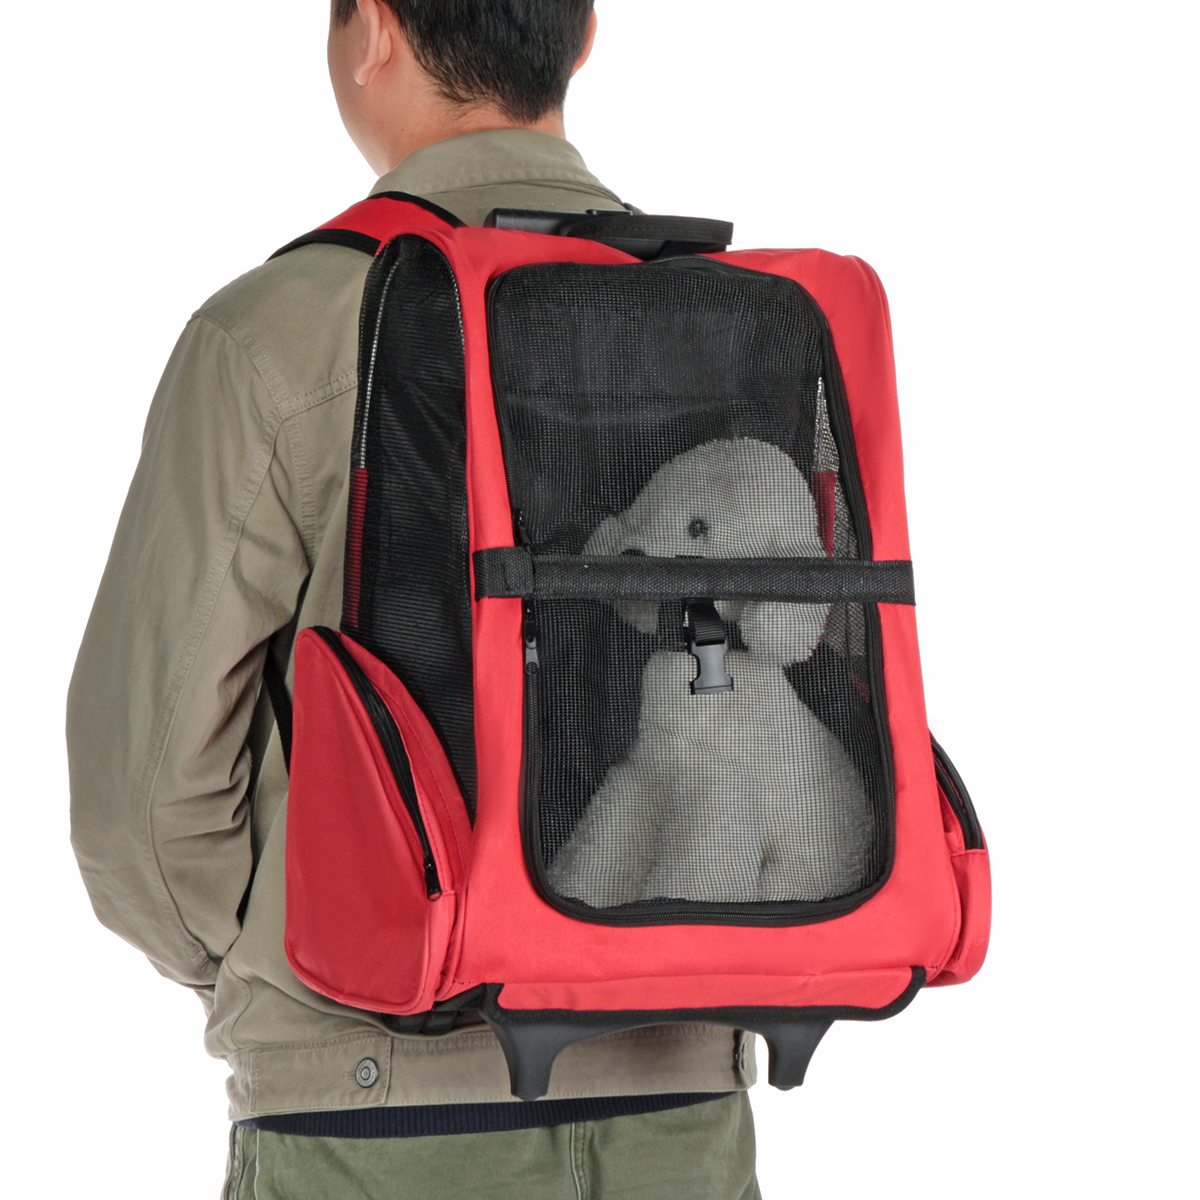 2-In-1-Pet-Carrier-Backpack-Dog-Cat-Puppy-Cart-Breathable-Outdoor-Travel-Bag-1615922-3